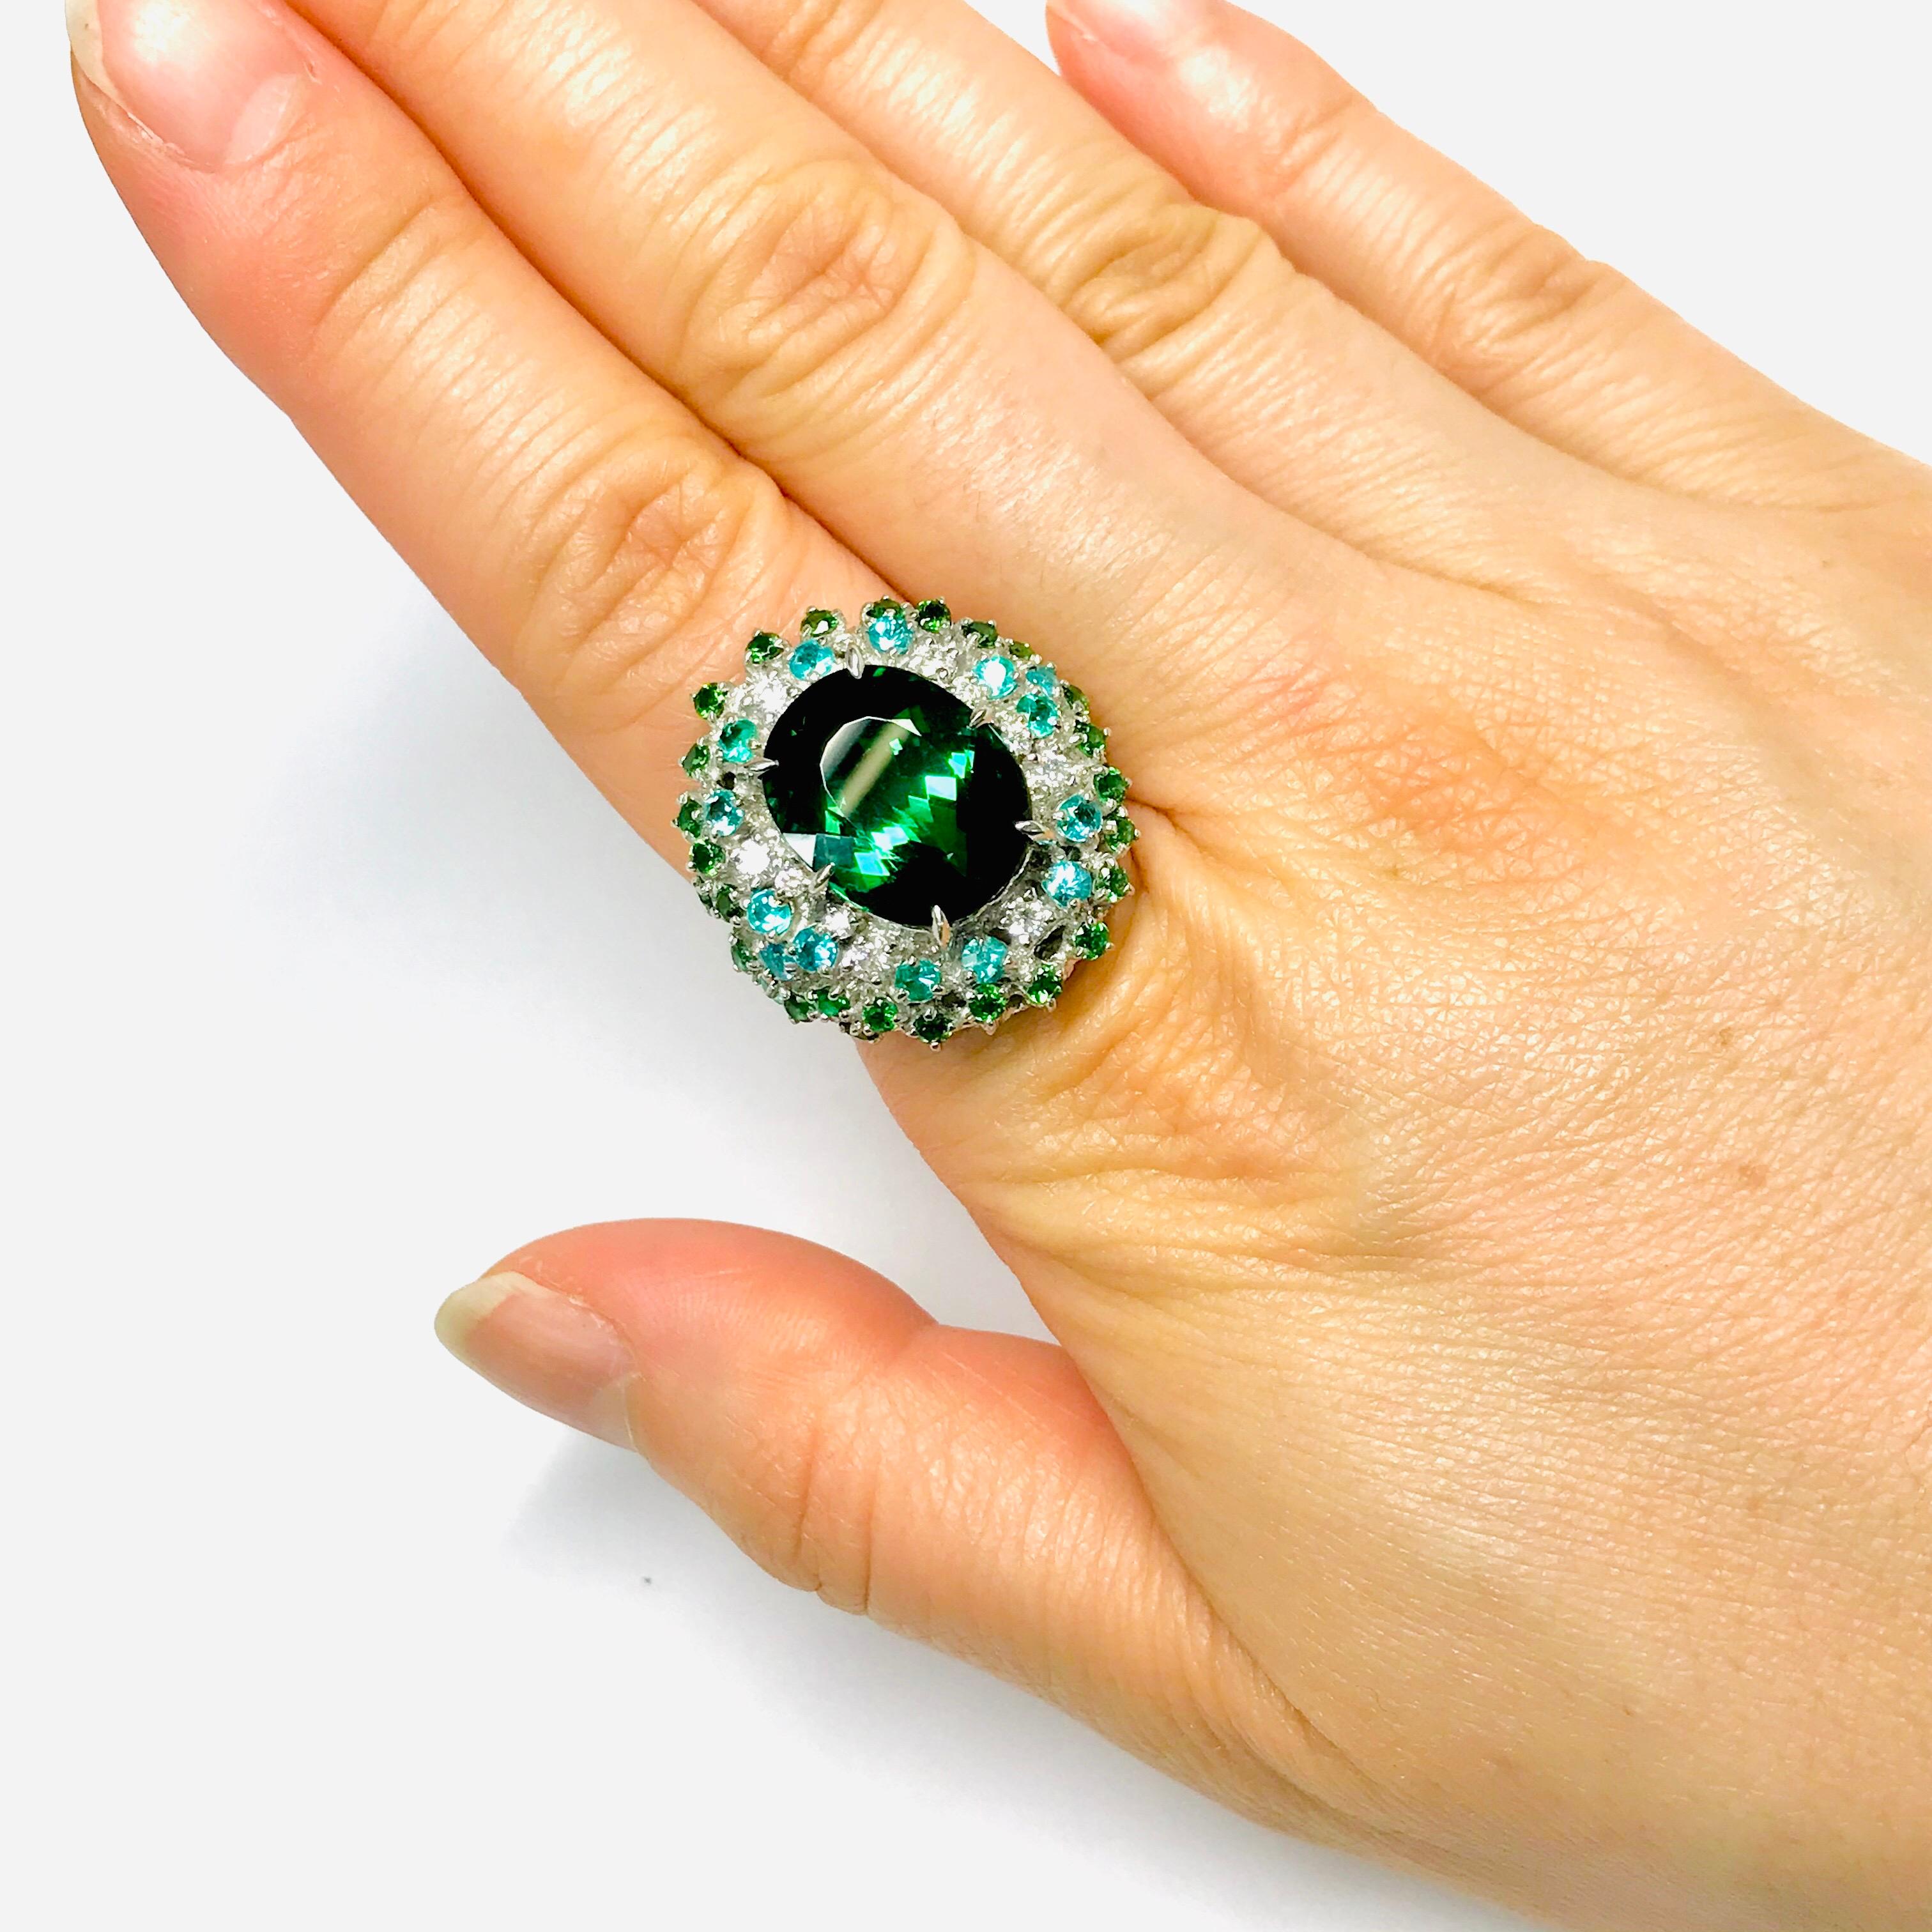 The list price includes the Japanese 10% Sales Tax.
All buyers outside of Japan will receive the tax exemption from the list price. 
Please inquire for details.

[Product Details]
PT900
OVAL GREEN TOURMALINE  9.85ct
GREEN TOURMALINE   0.93ct
PARAIBA